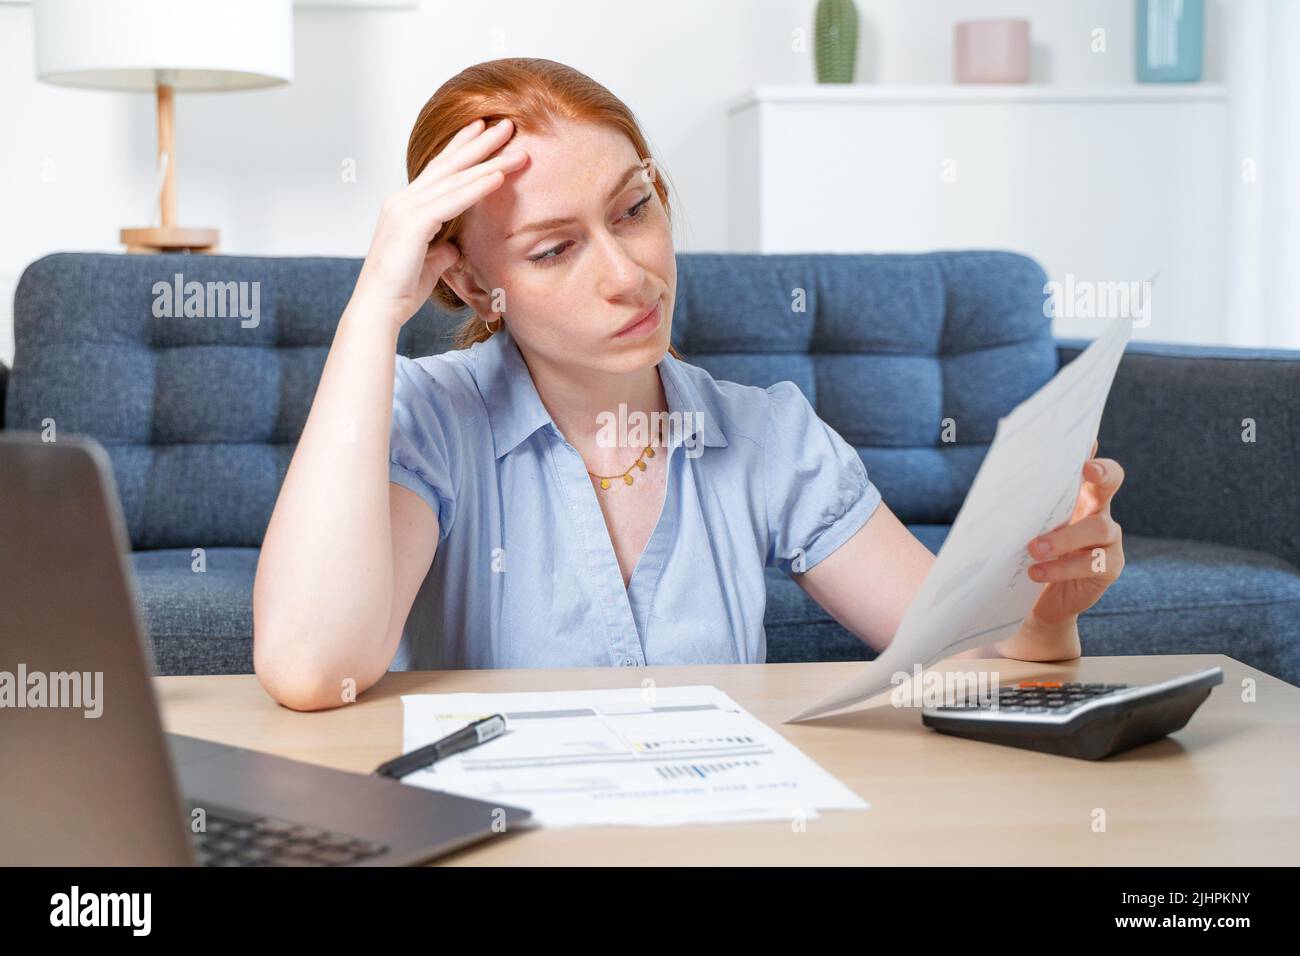 One woman examining documents and using laptop while working at home Stock Photo